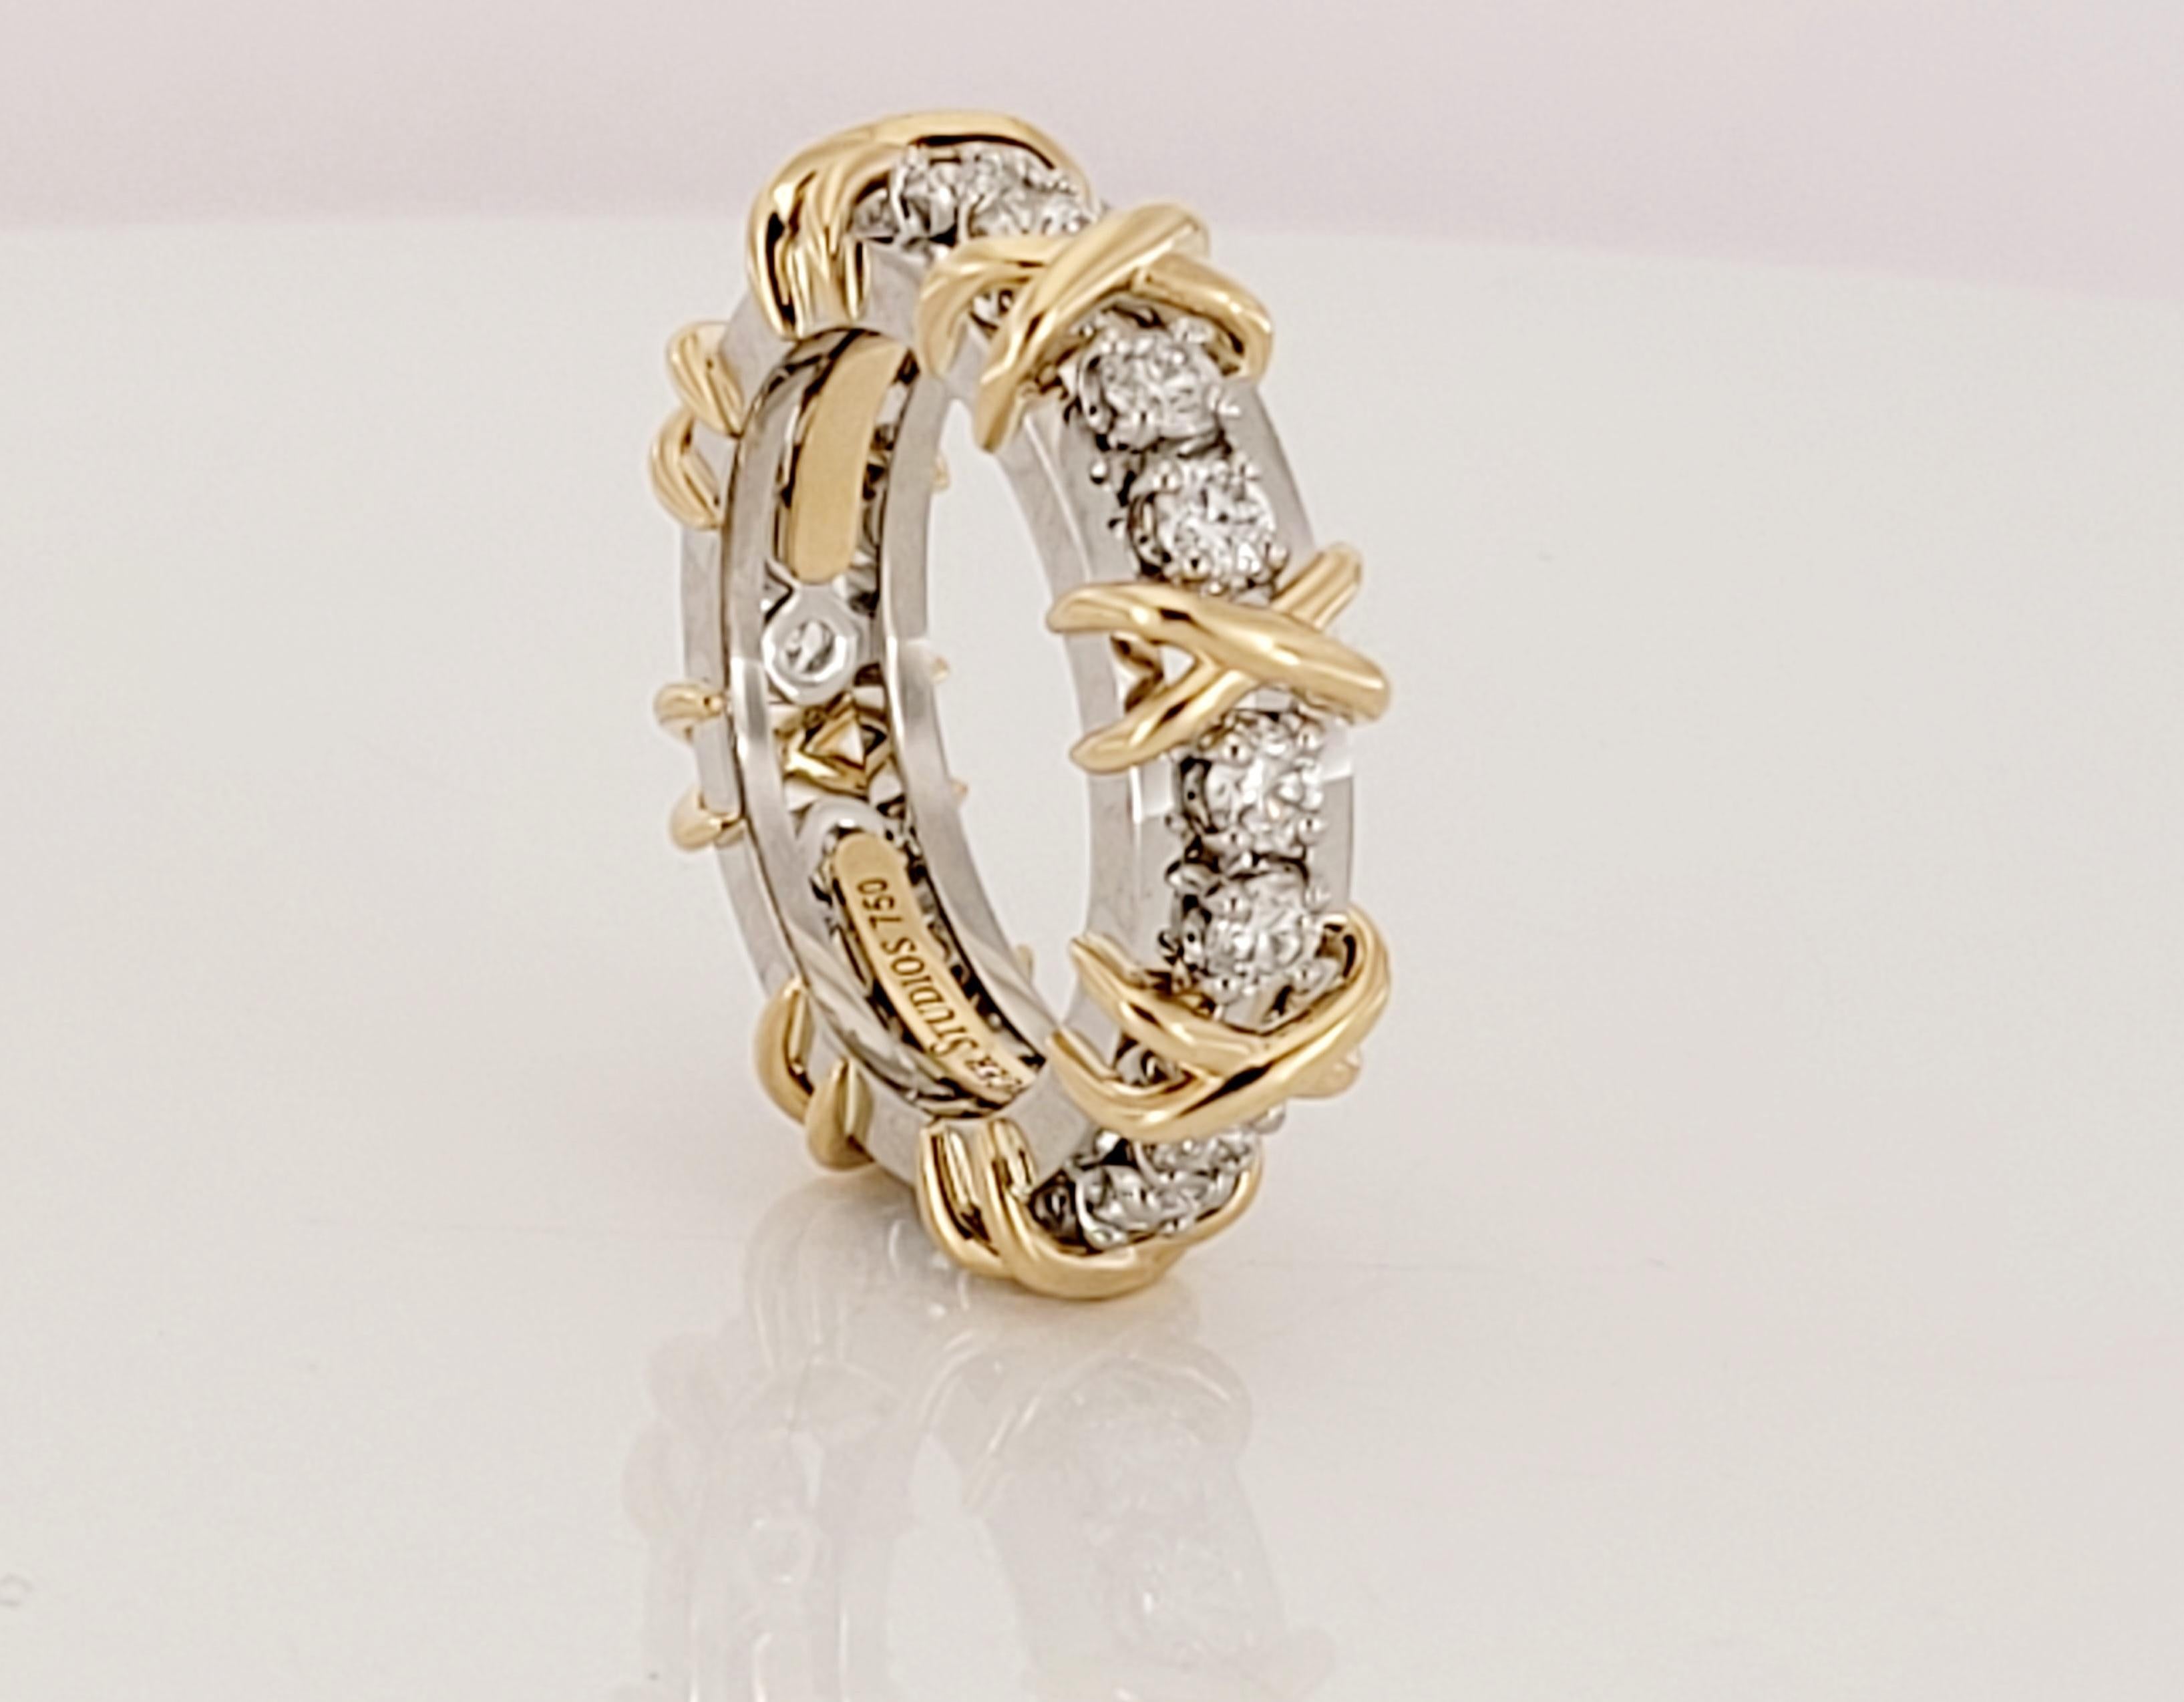 Brand Tiffany & co
Sixteen Stone Ring
18K yellow Gold & PT950
Ring Size 6.25
Main stone Diamond
Carat total weight 1.14ct
Diamond clarity VS
Color Grade F-G
Weight 11.8gr
Retail price: $13,000
Comes with Tiffany &co ring box